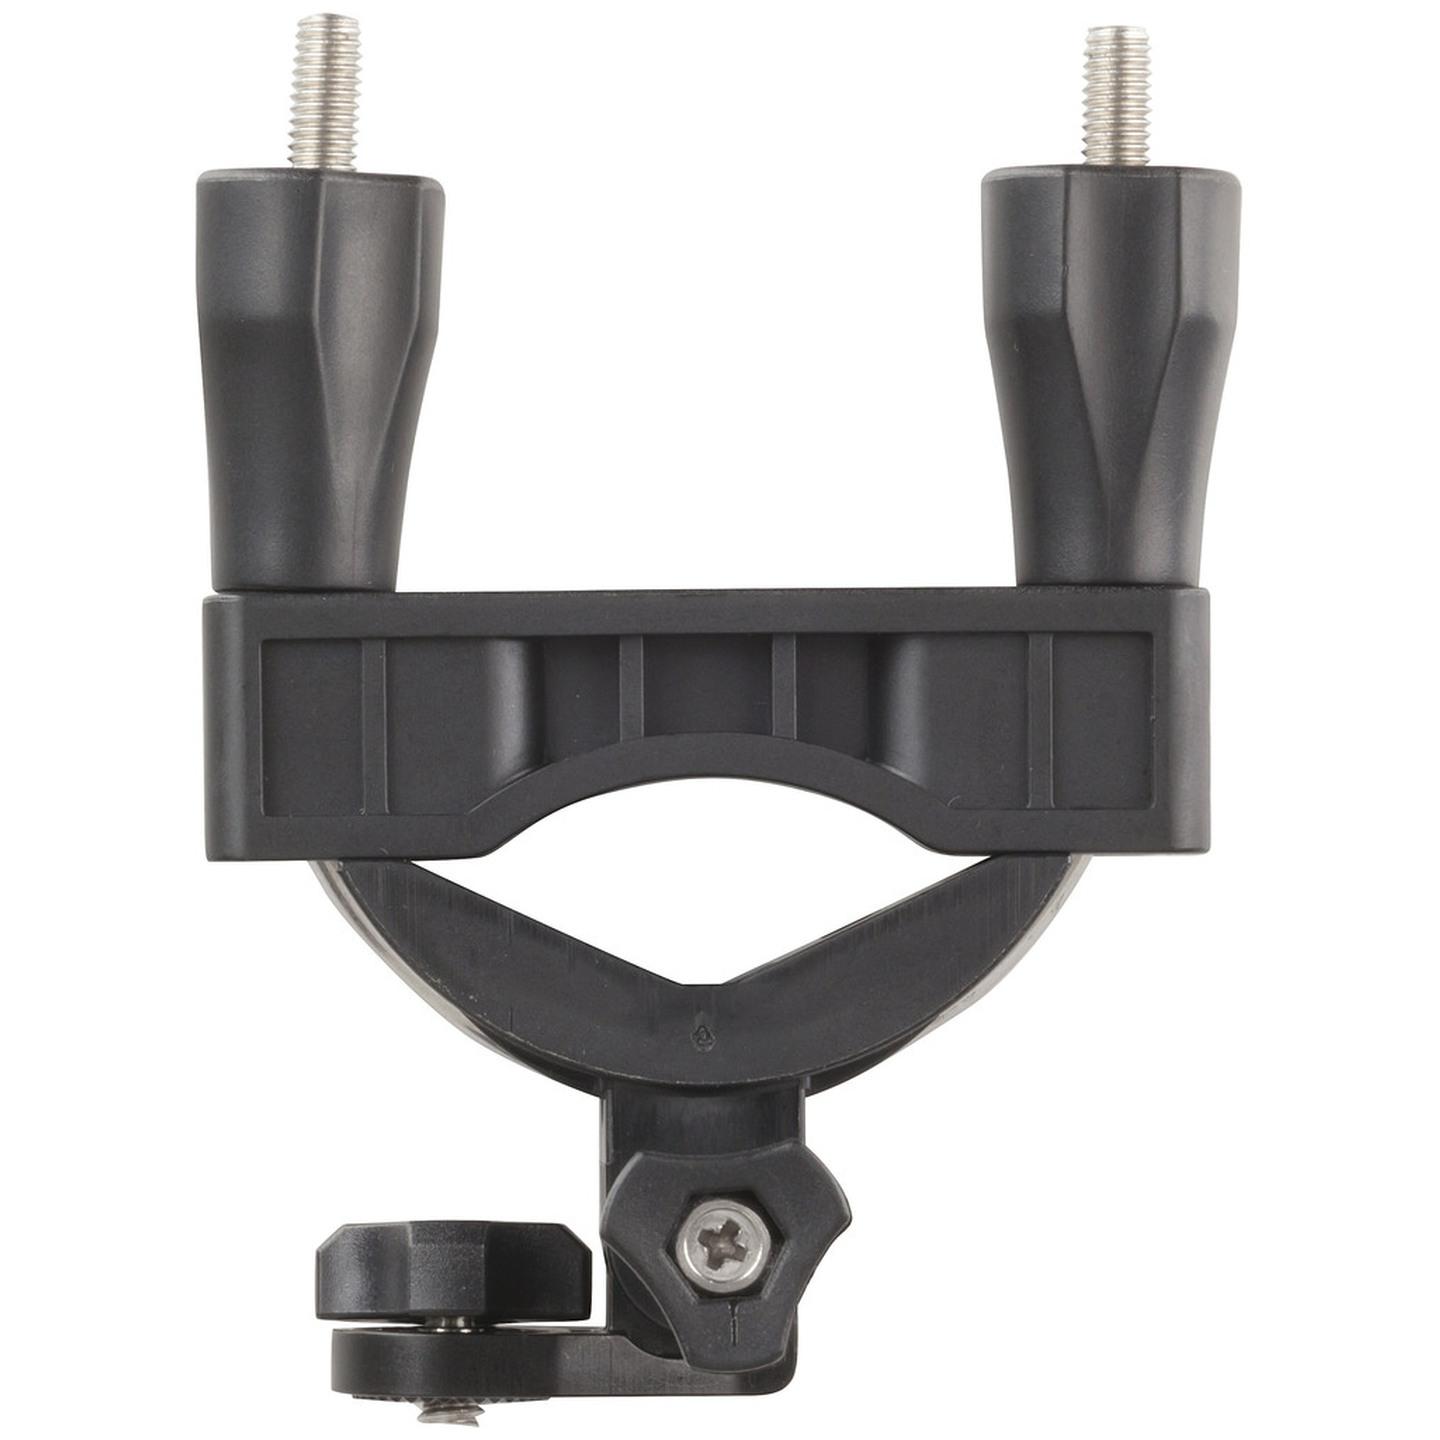 Pole Mount for Action Cameras 32-55mm